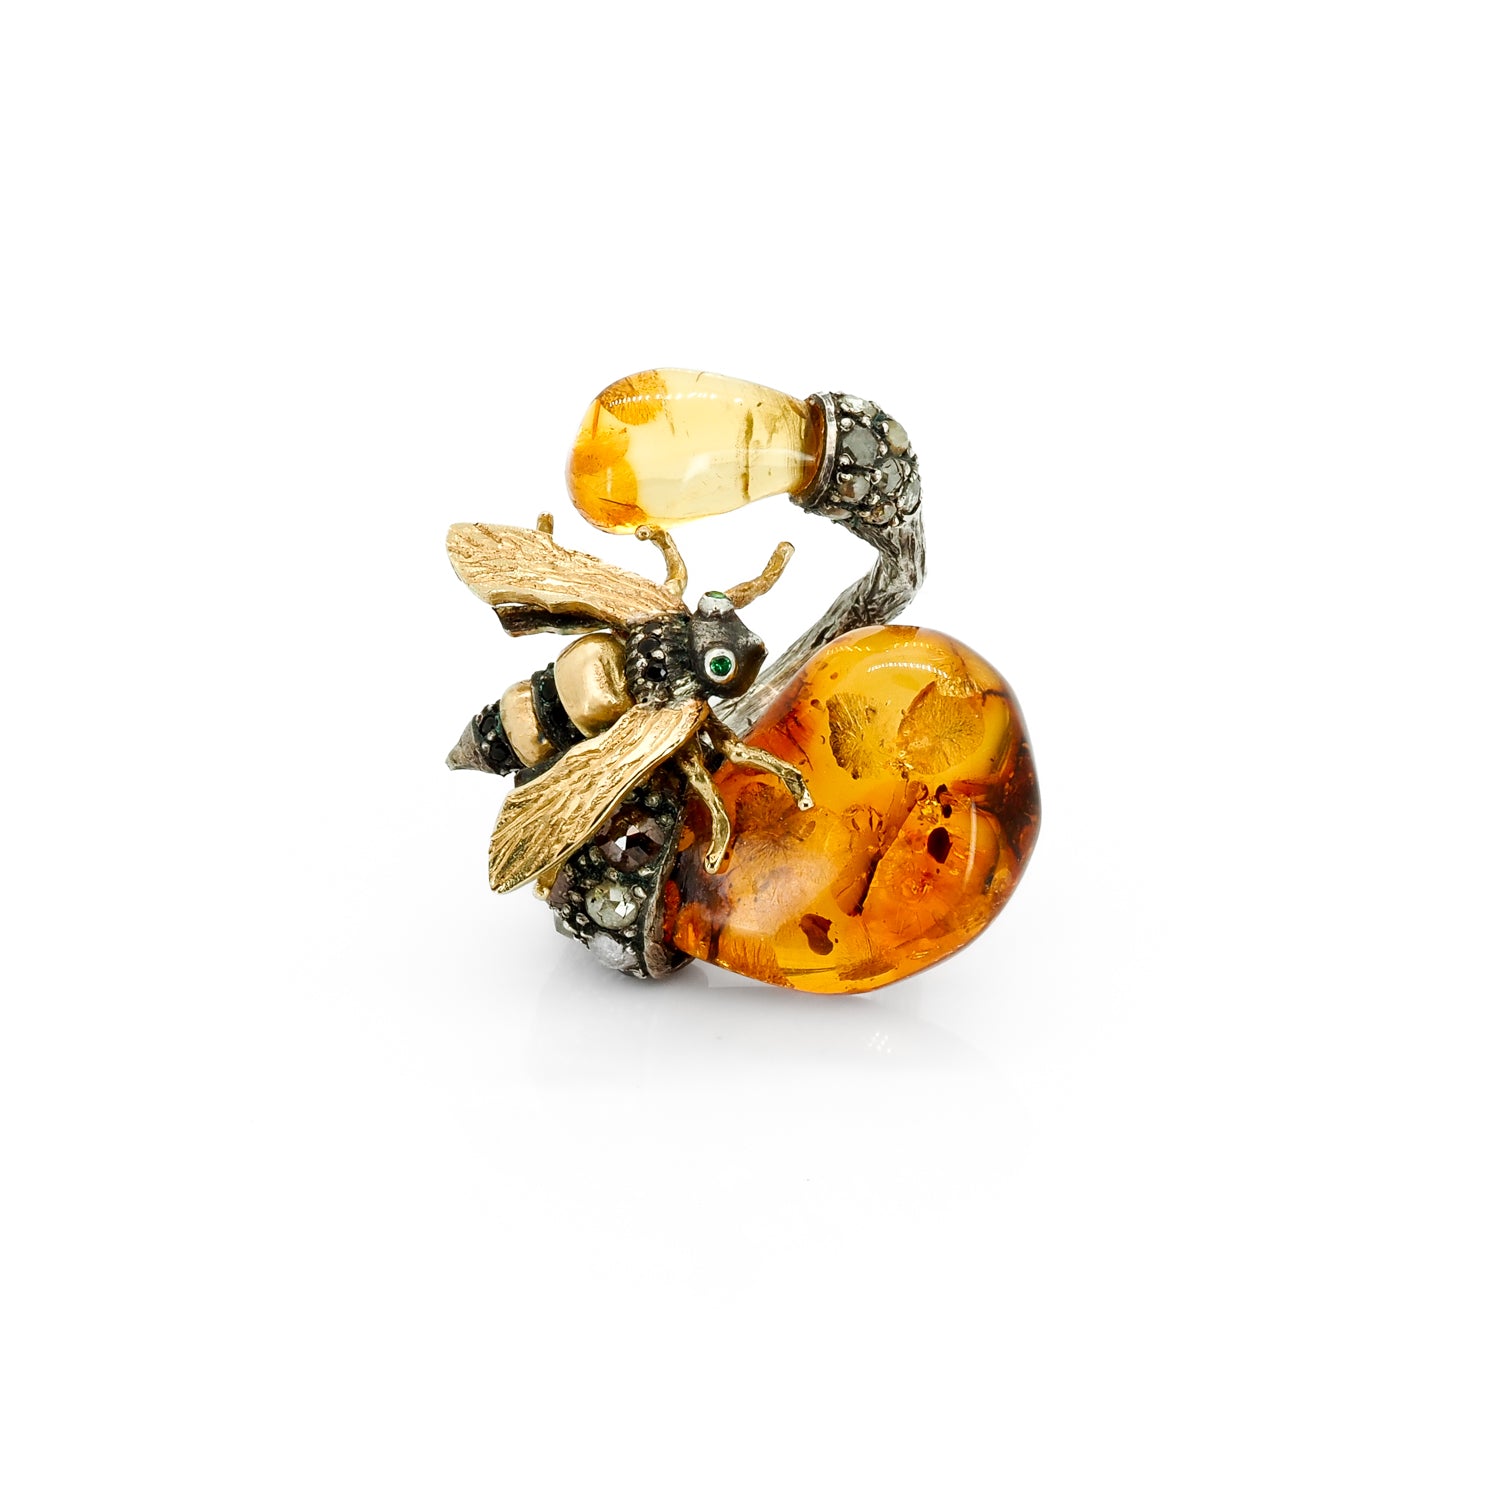 Taru Jewelry Bee Ring made of 18K yellow gold and sterling silver is centered with a gorgeous amber stone that mimics the hue of honey, upon which the bee rests.